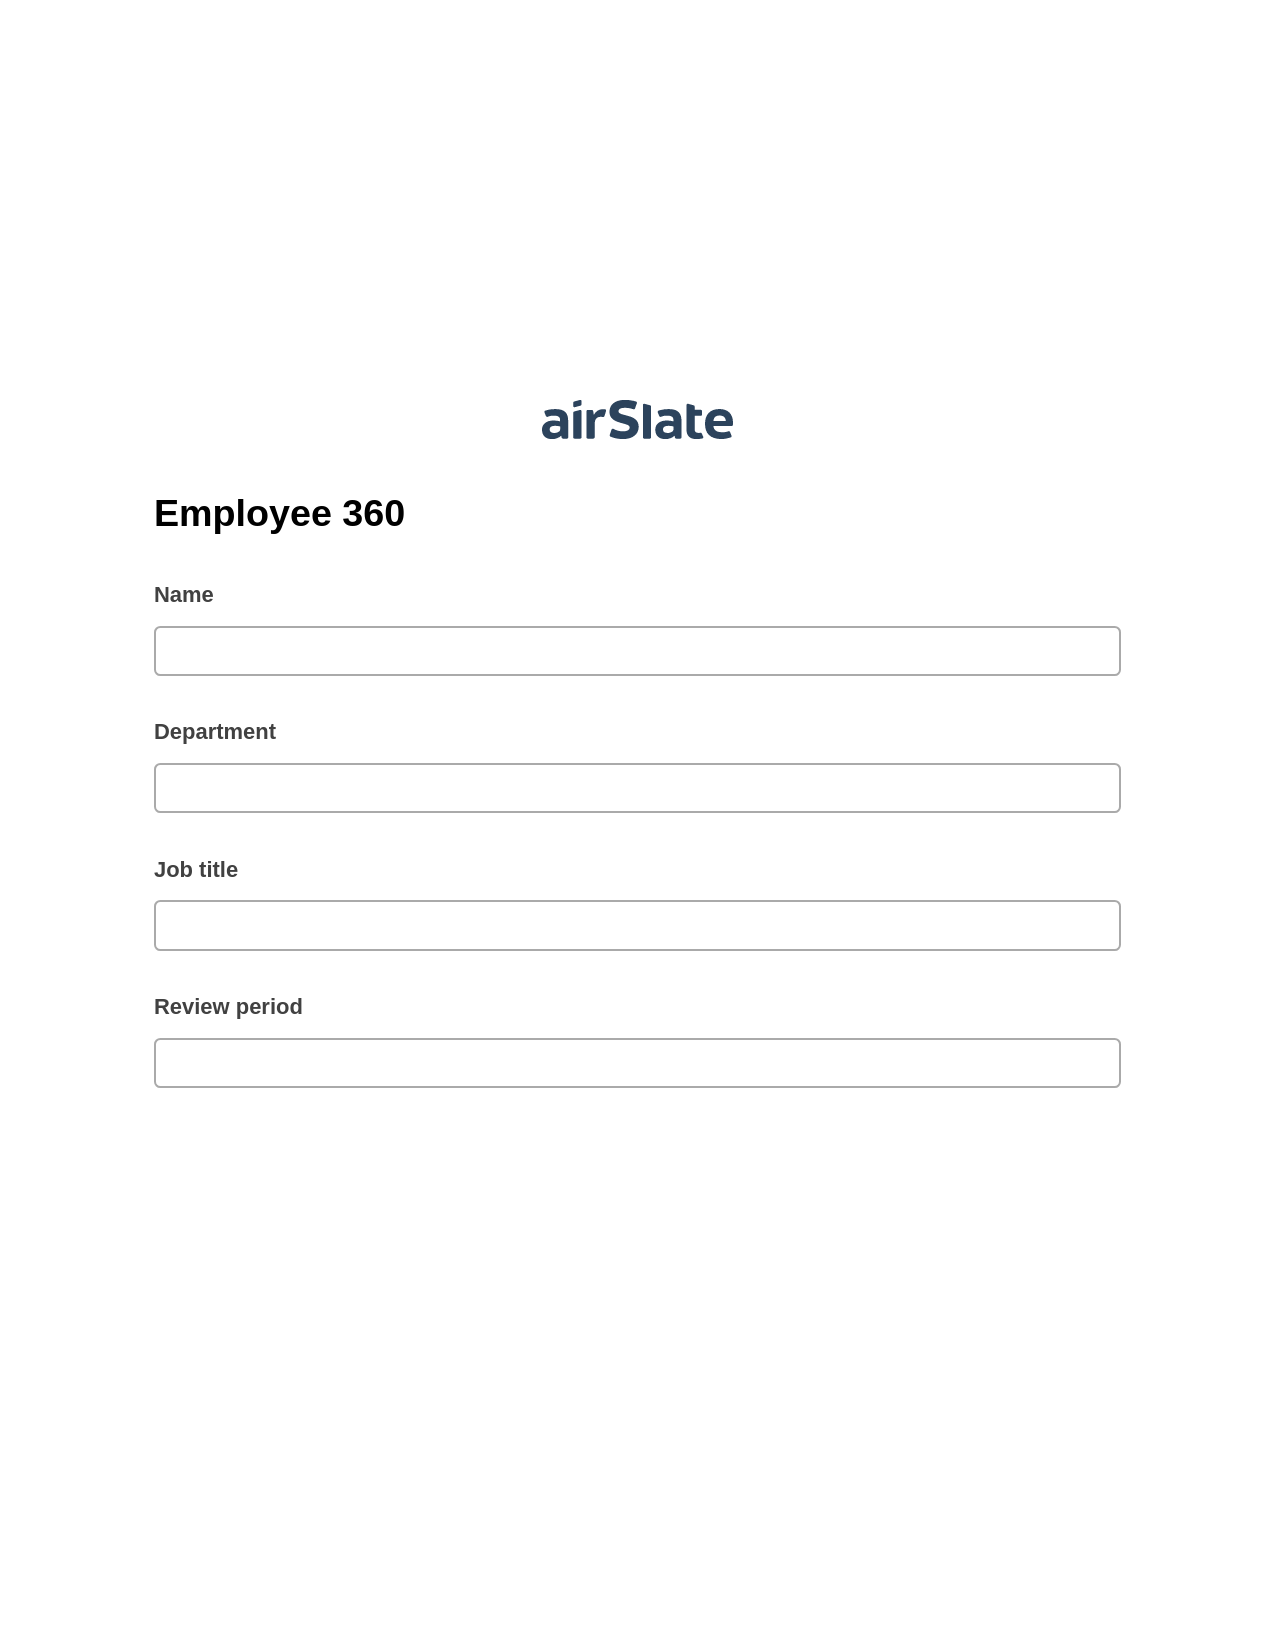 Employee 360 Pre-fill Dropdowns from Airtable, Update NetSuite Record Bot, Export to WebMerge Bot